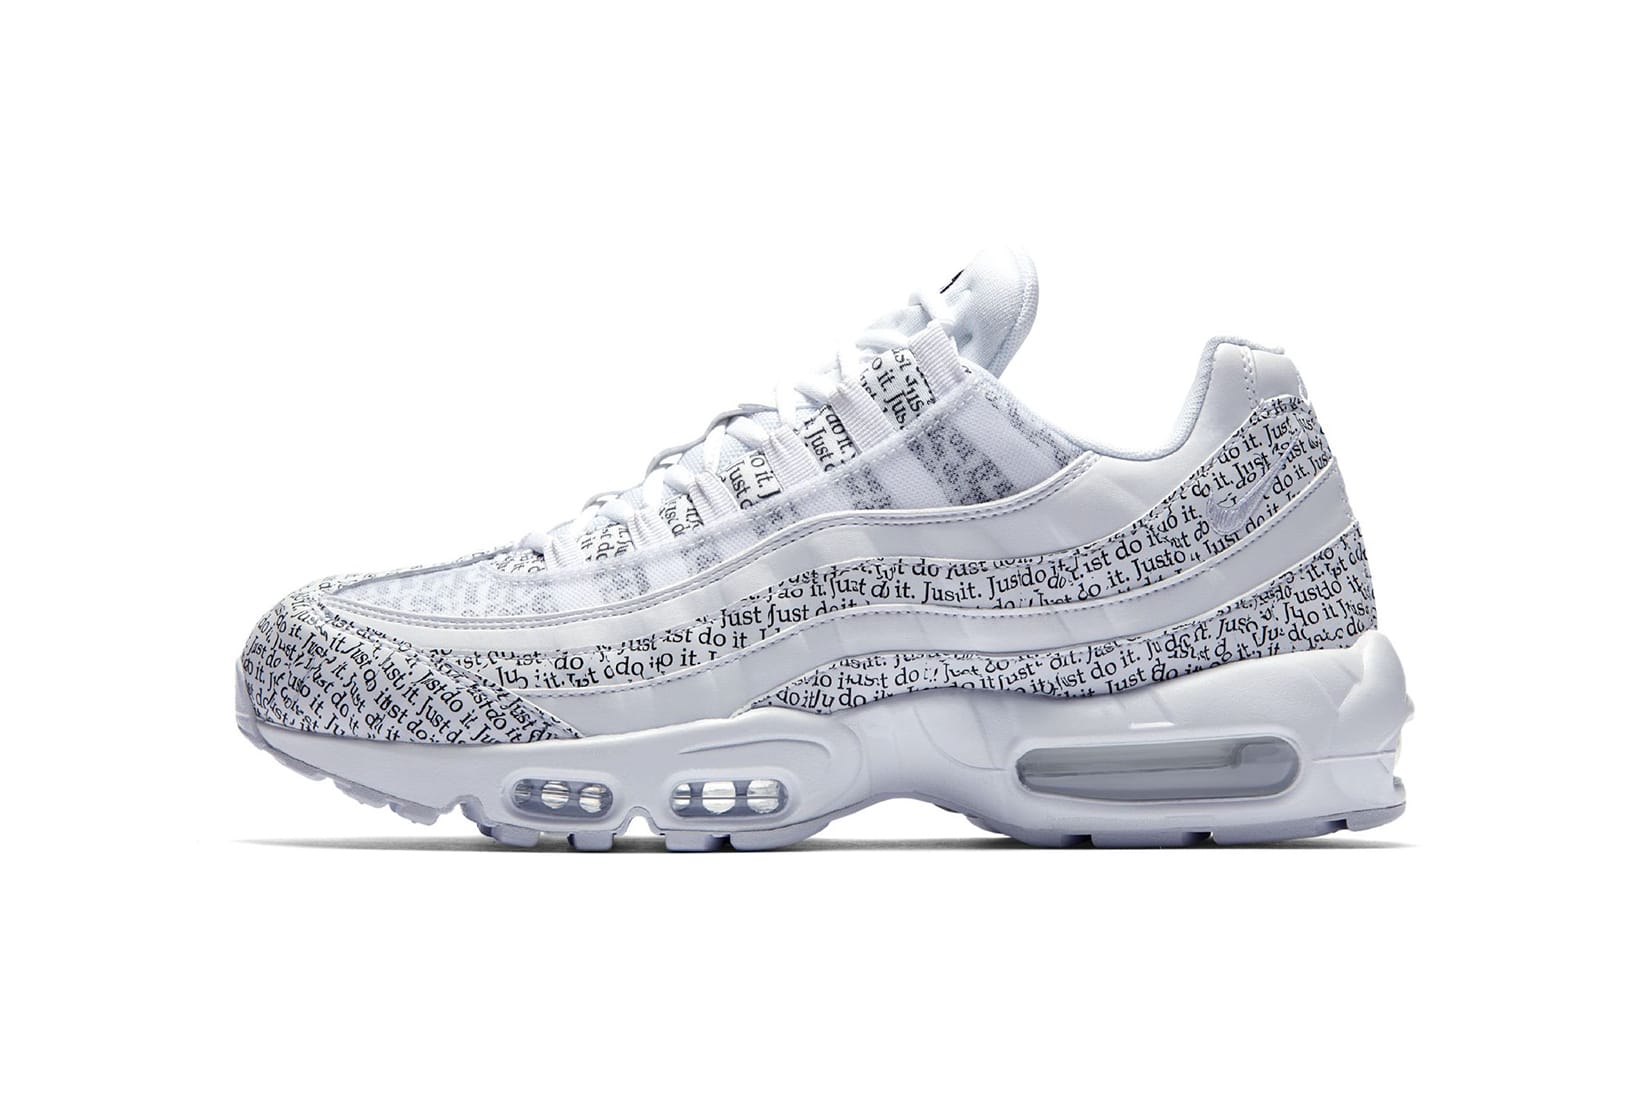 nike just do it white and black newspaper print air max 95 se trainers